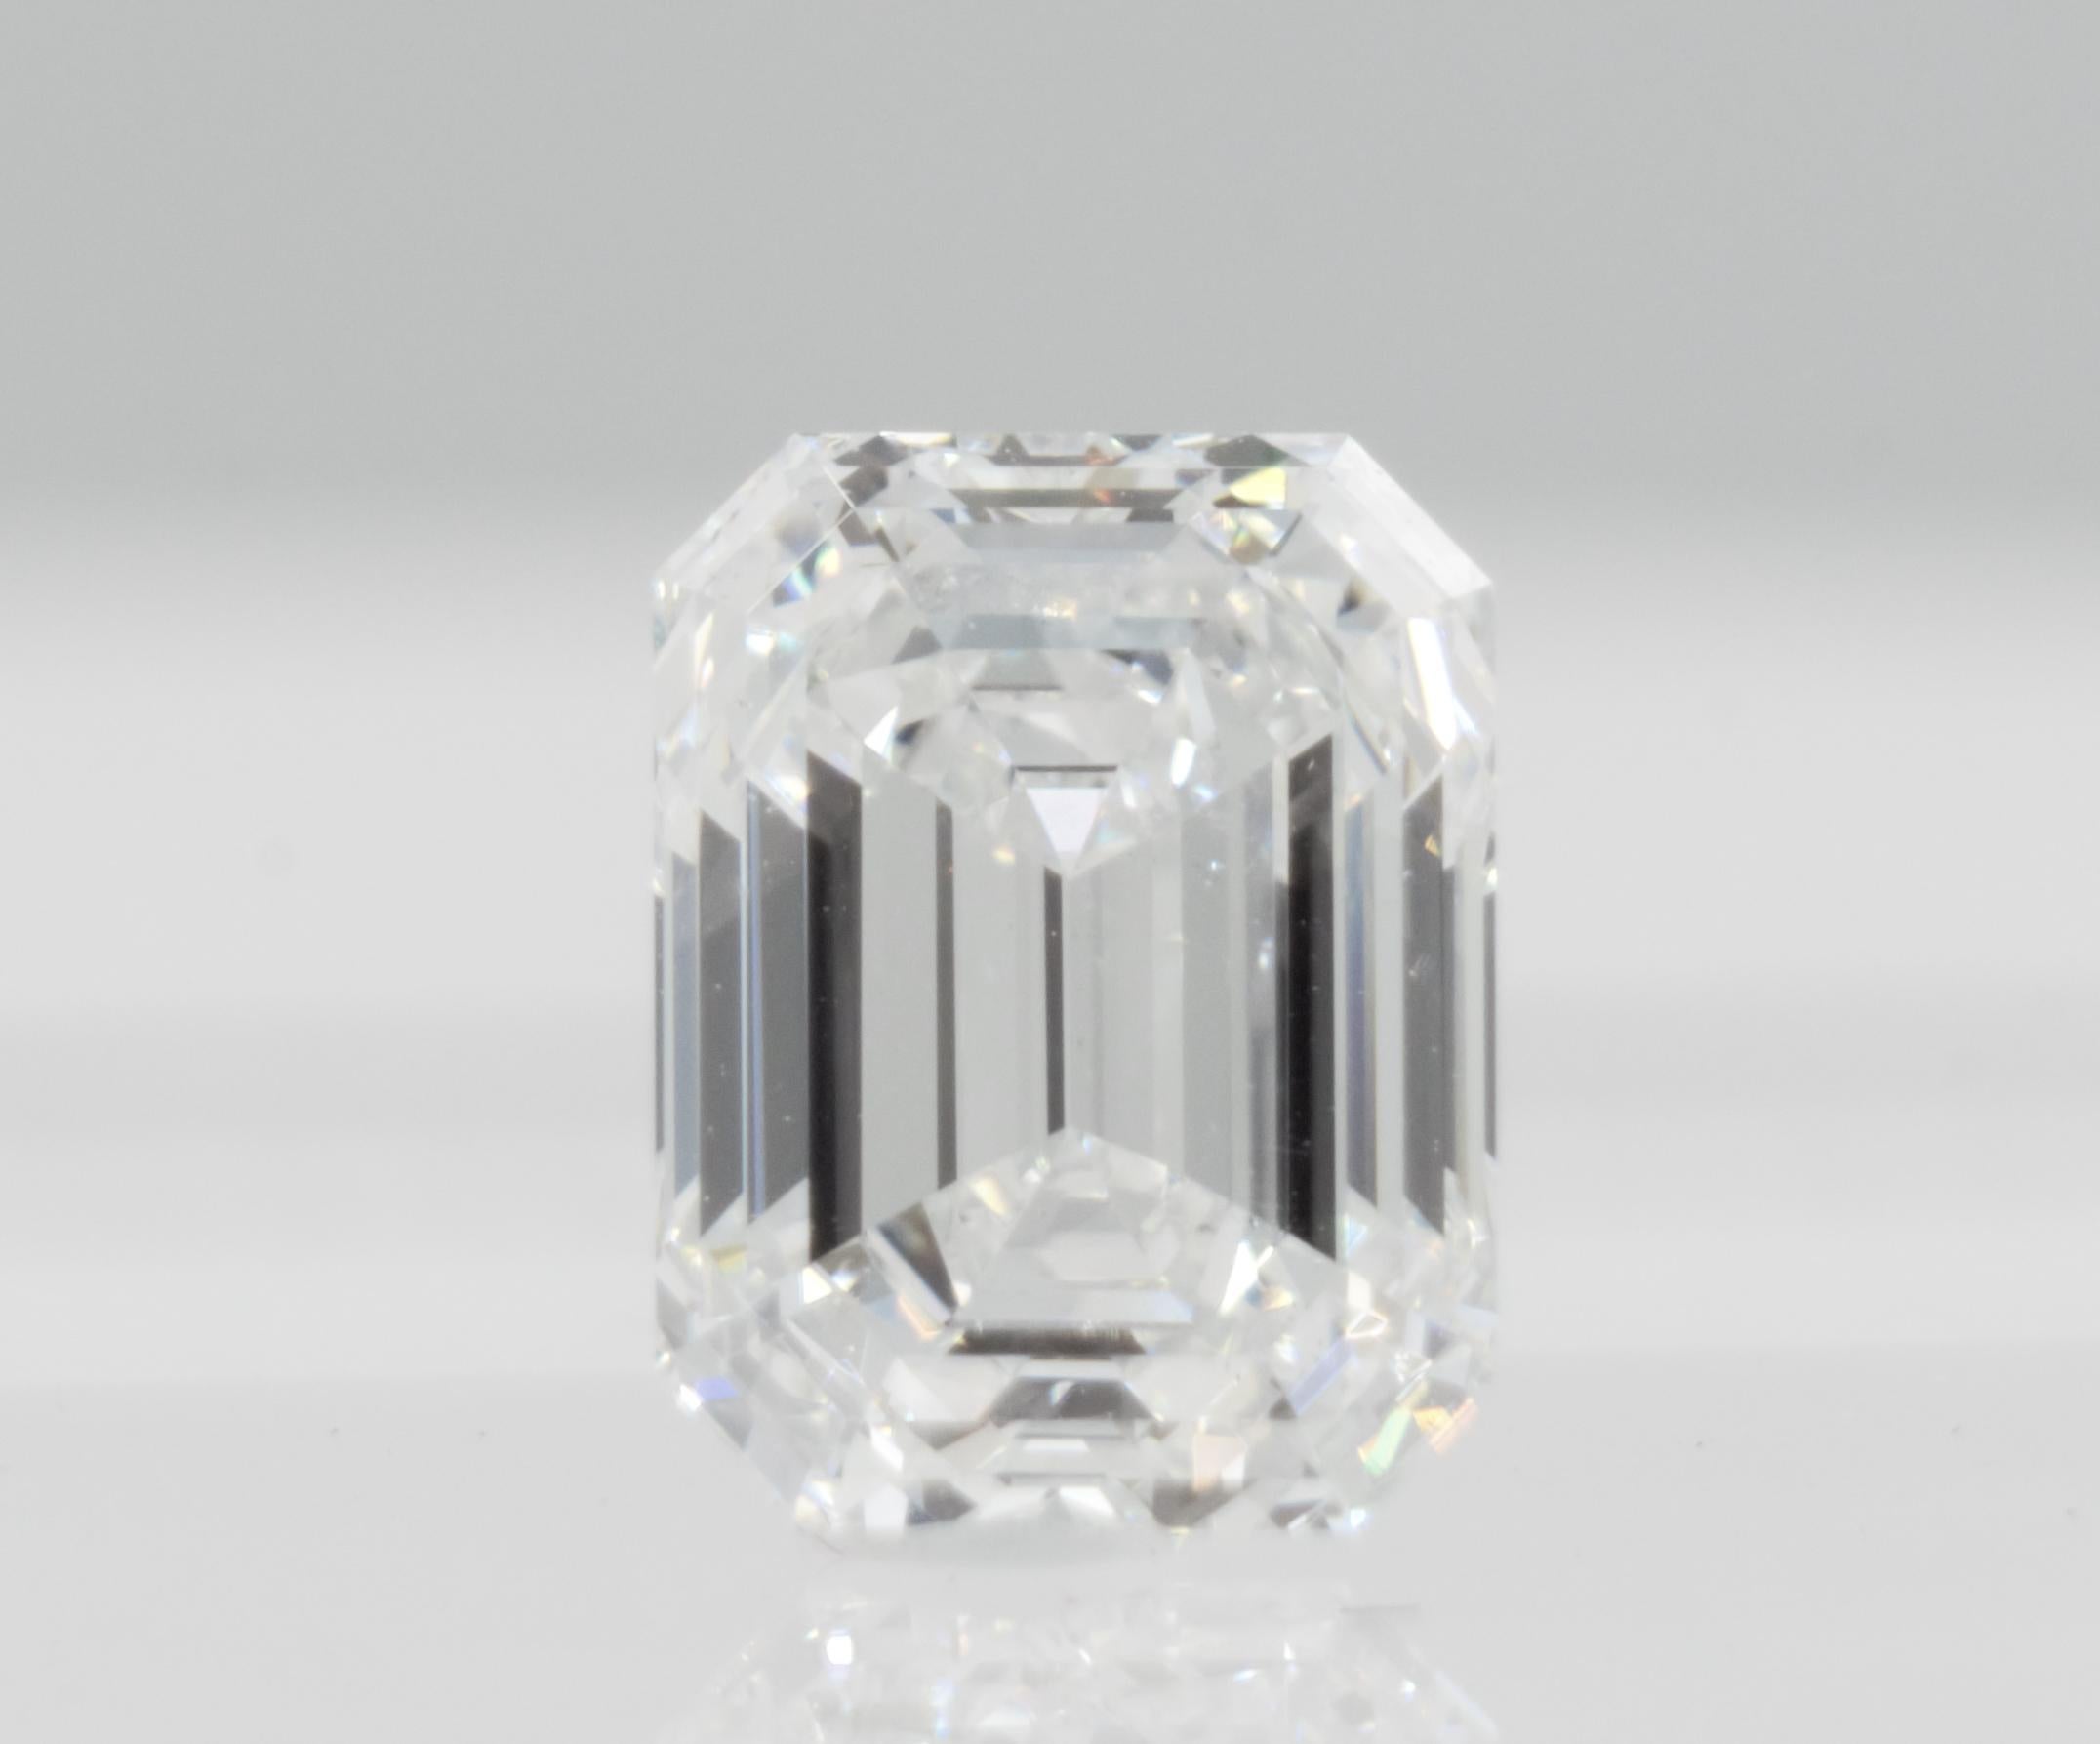 Gorgeous loose 1.60ct emerald cut diamond that is certified by GIA with a laser inscription no# 1175388529.  F Color and VS1 Clarity with no fluorescence. The diamond is a double XX for its excellent polish and symmetry. The GIA diamond grading lab